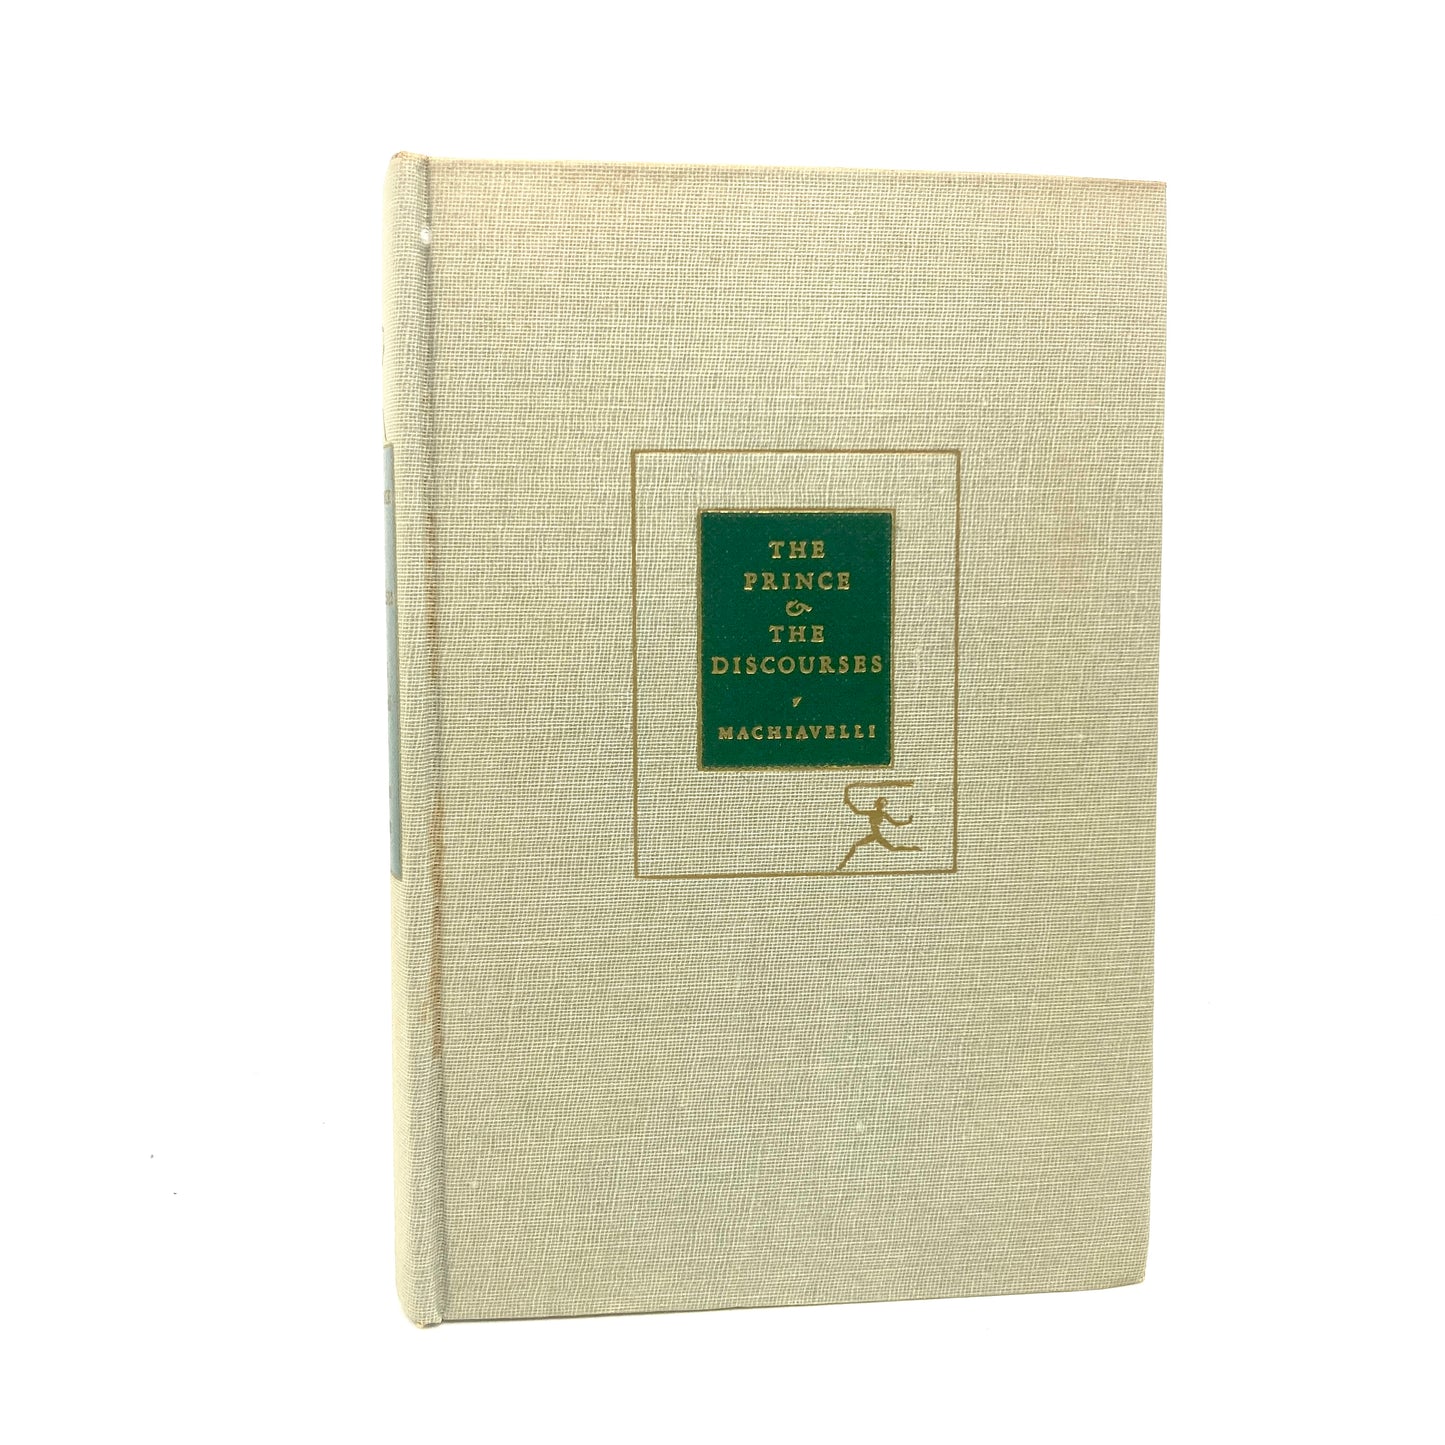 MACHIAVELLI, Niccolo "The Prince and the Discourses" [Modern Library, 1950] - Buzz Bookstore